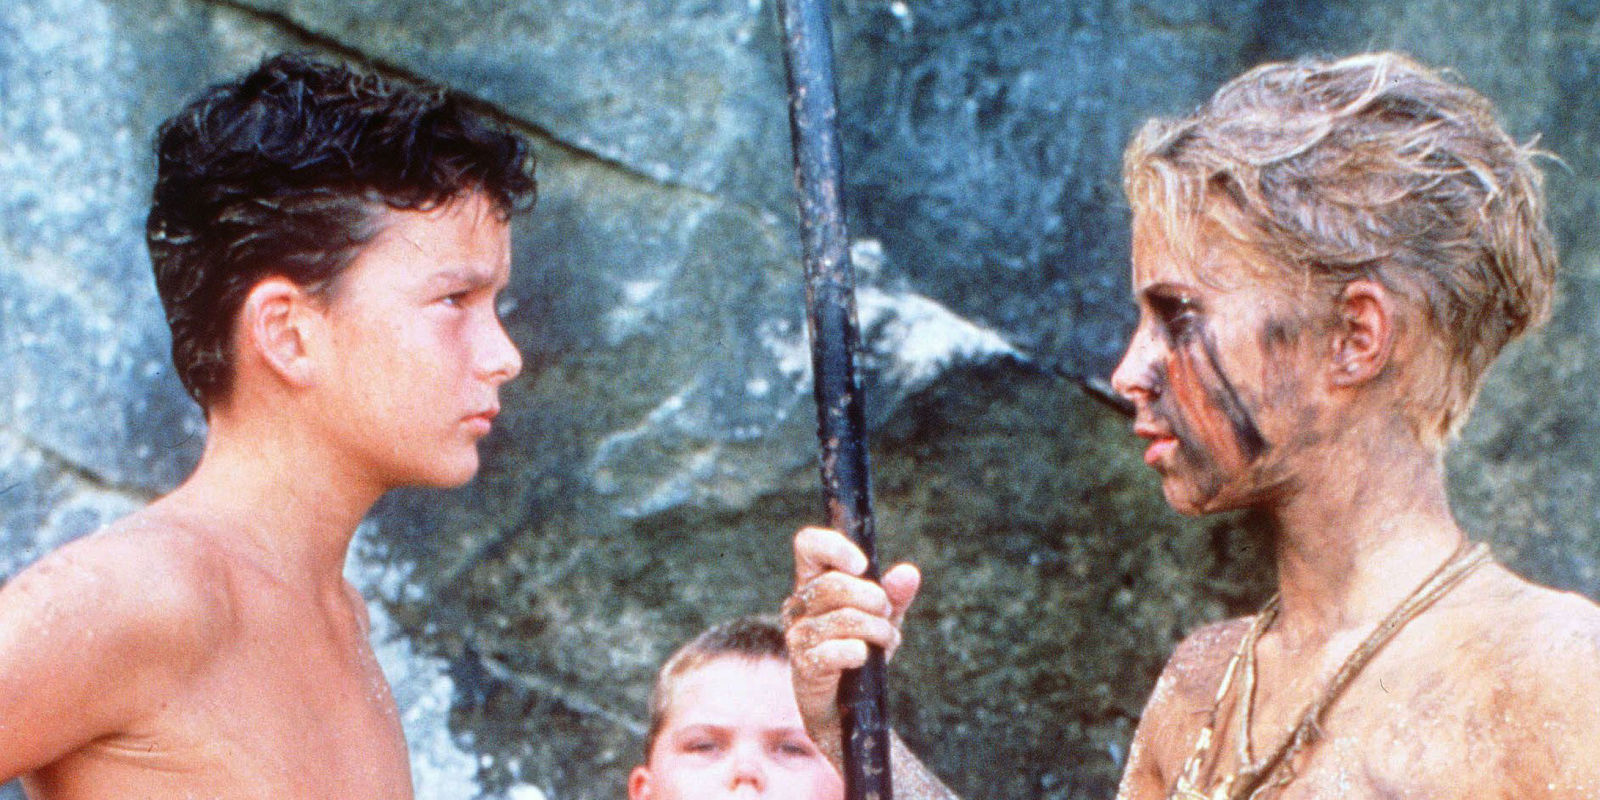 Ralph and Jack from Lord of the Flies - rivals, and representative types.